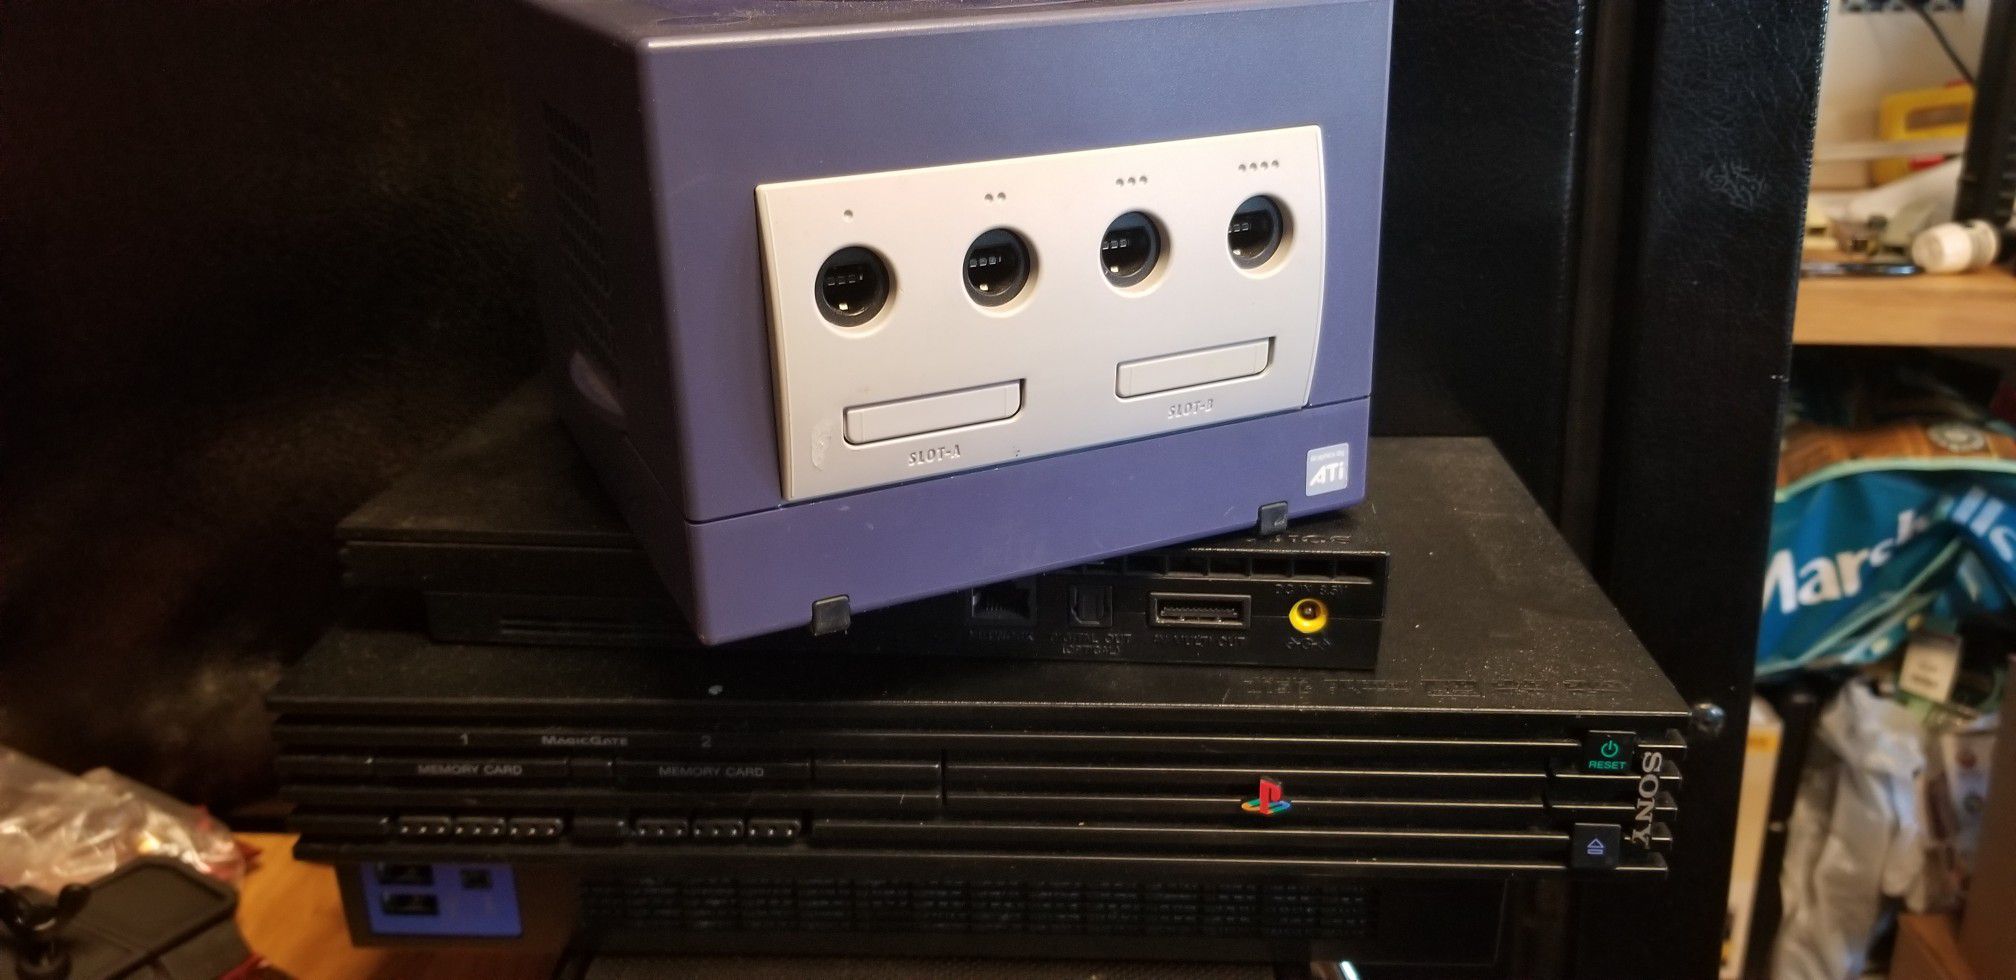 Ps2 and gamecube